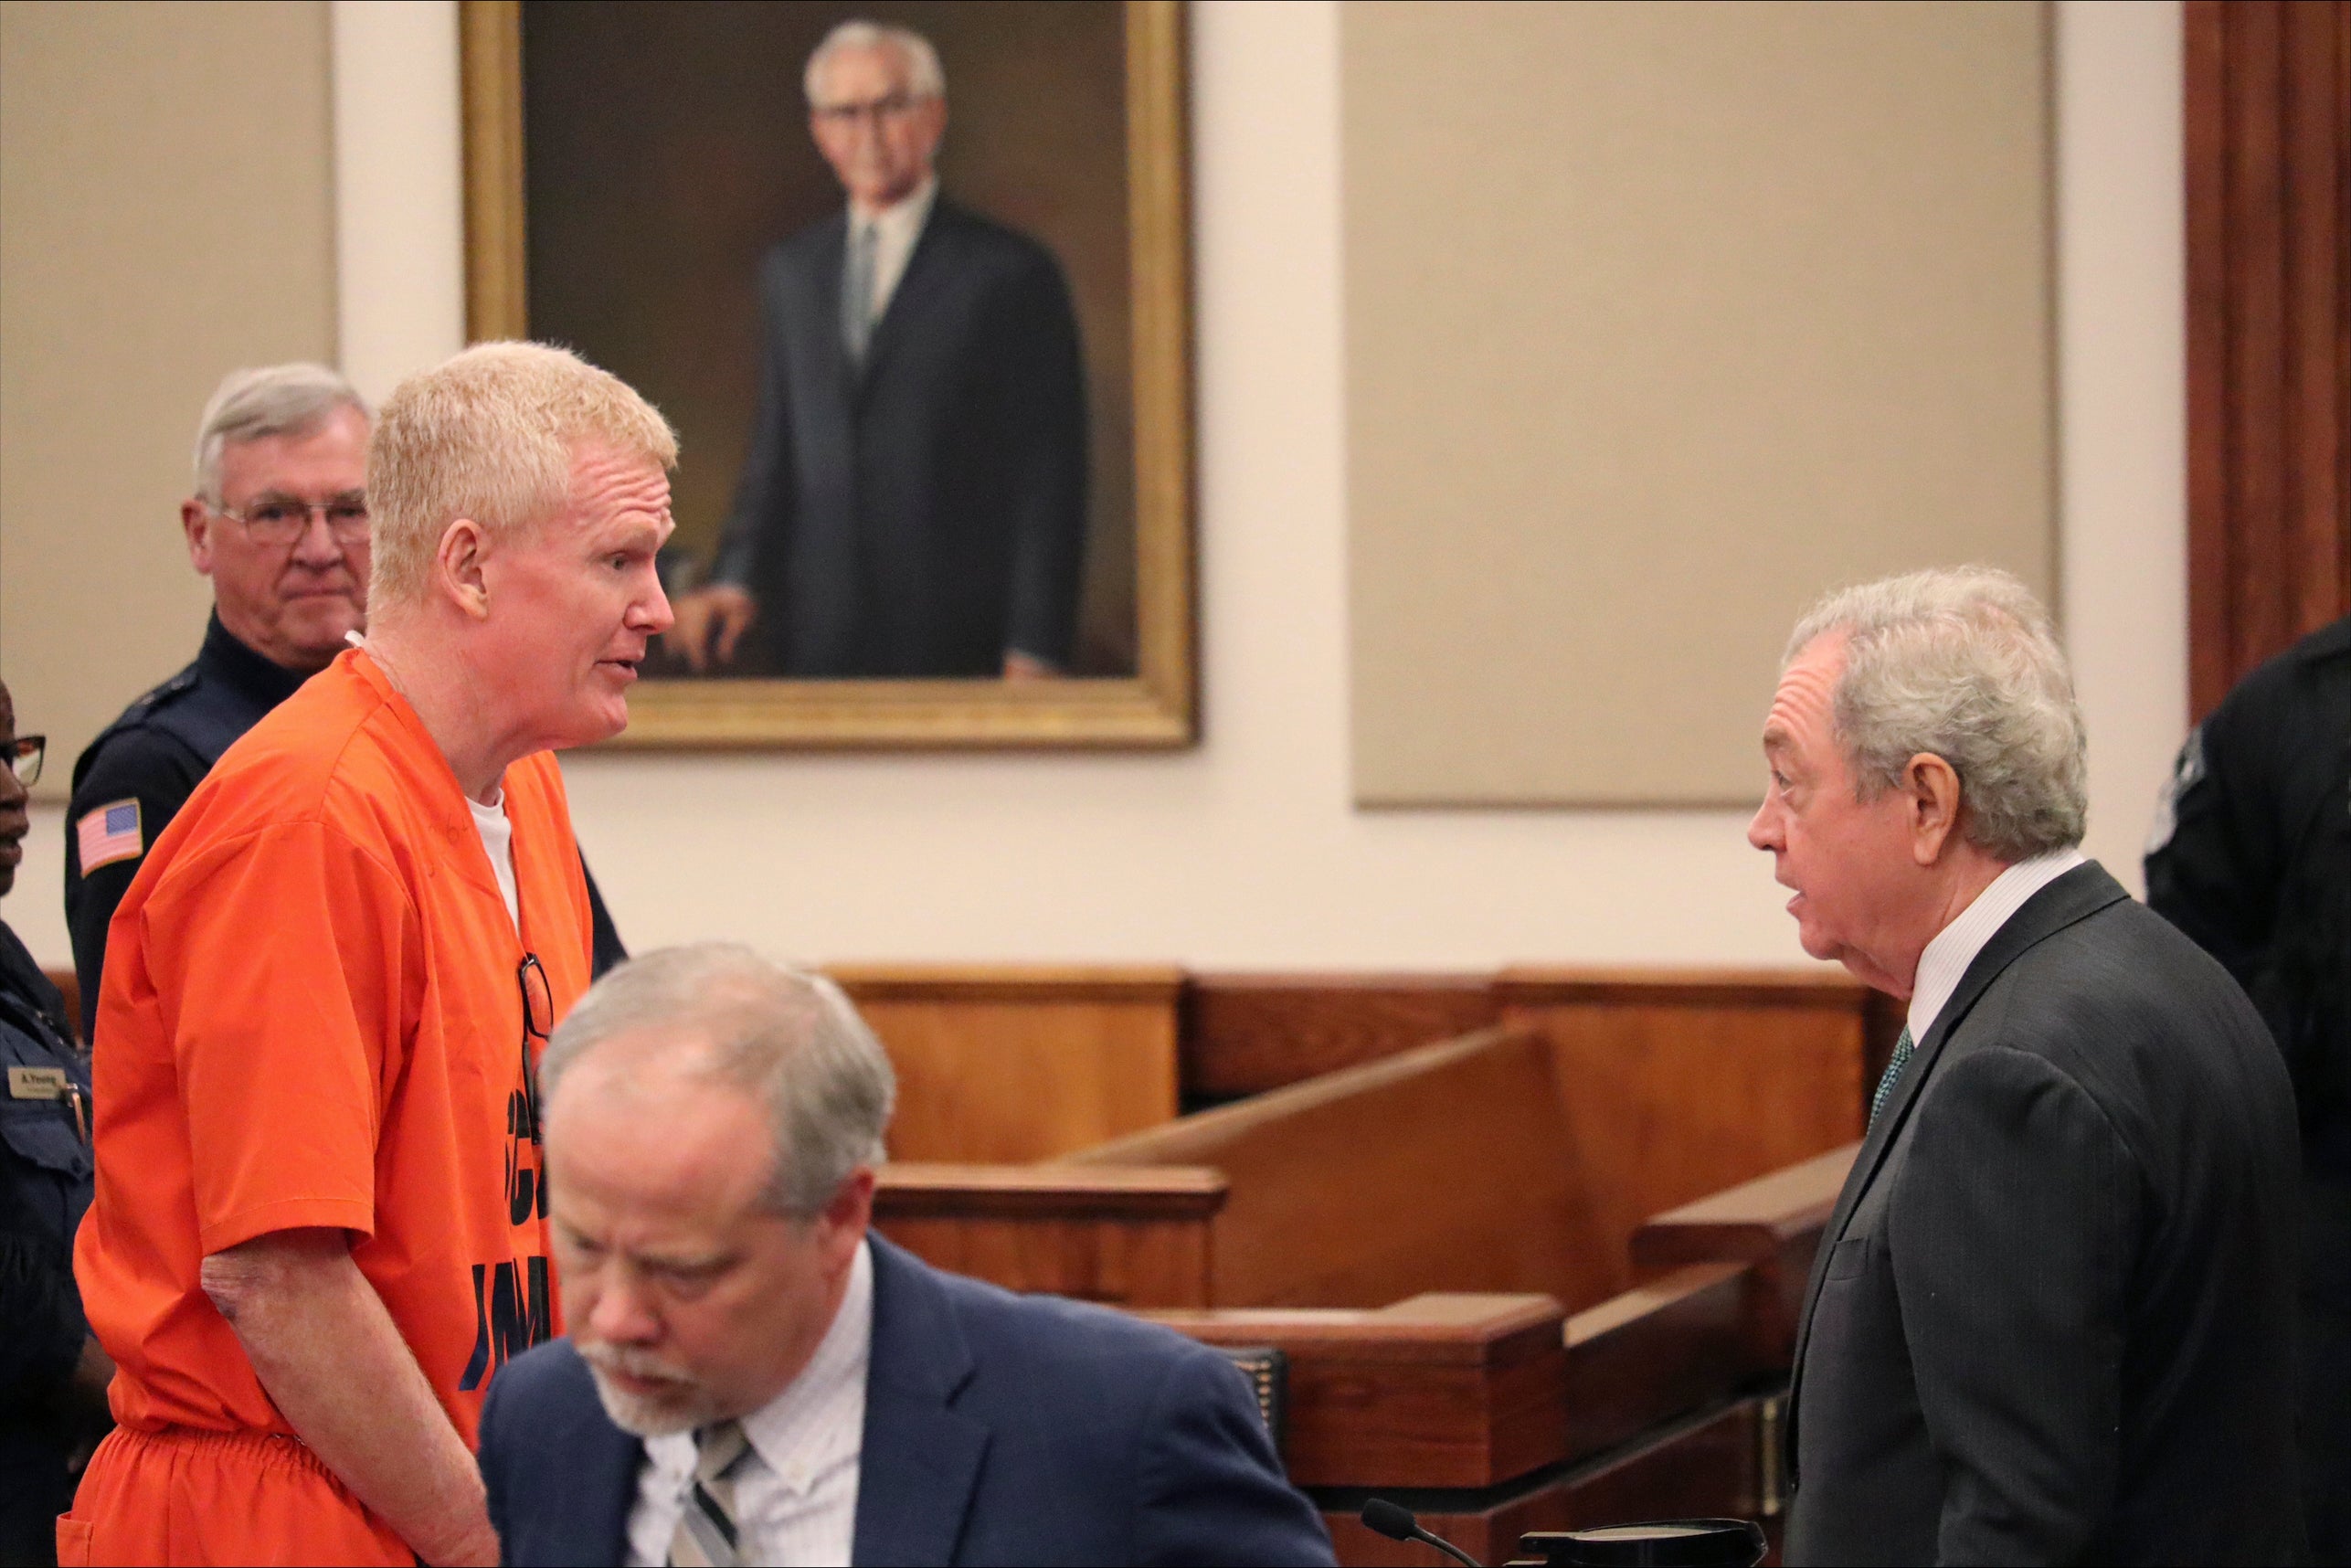 Alex Murdaugh appears in court in November where he reached a plea deal on his state financial crimes